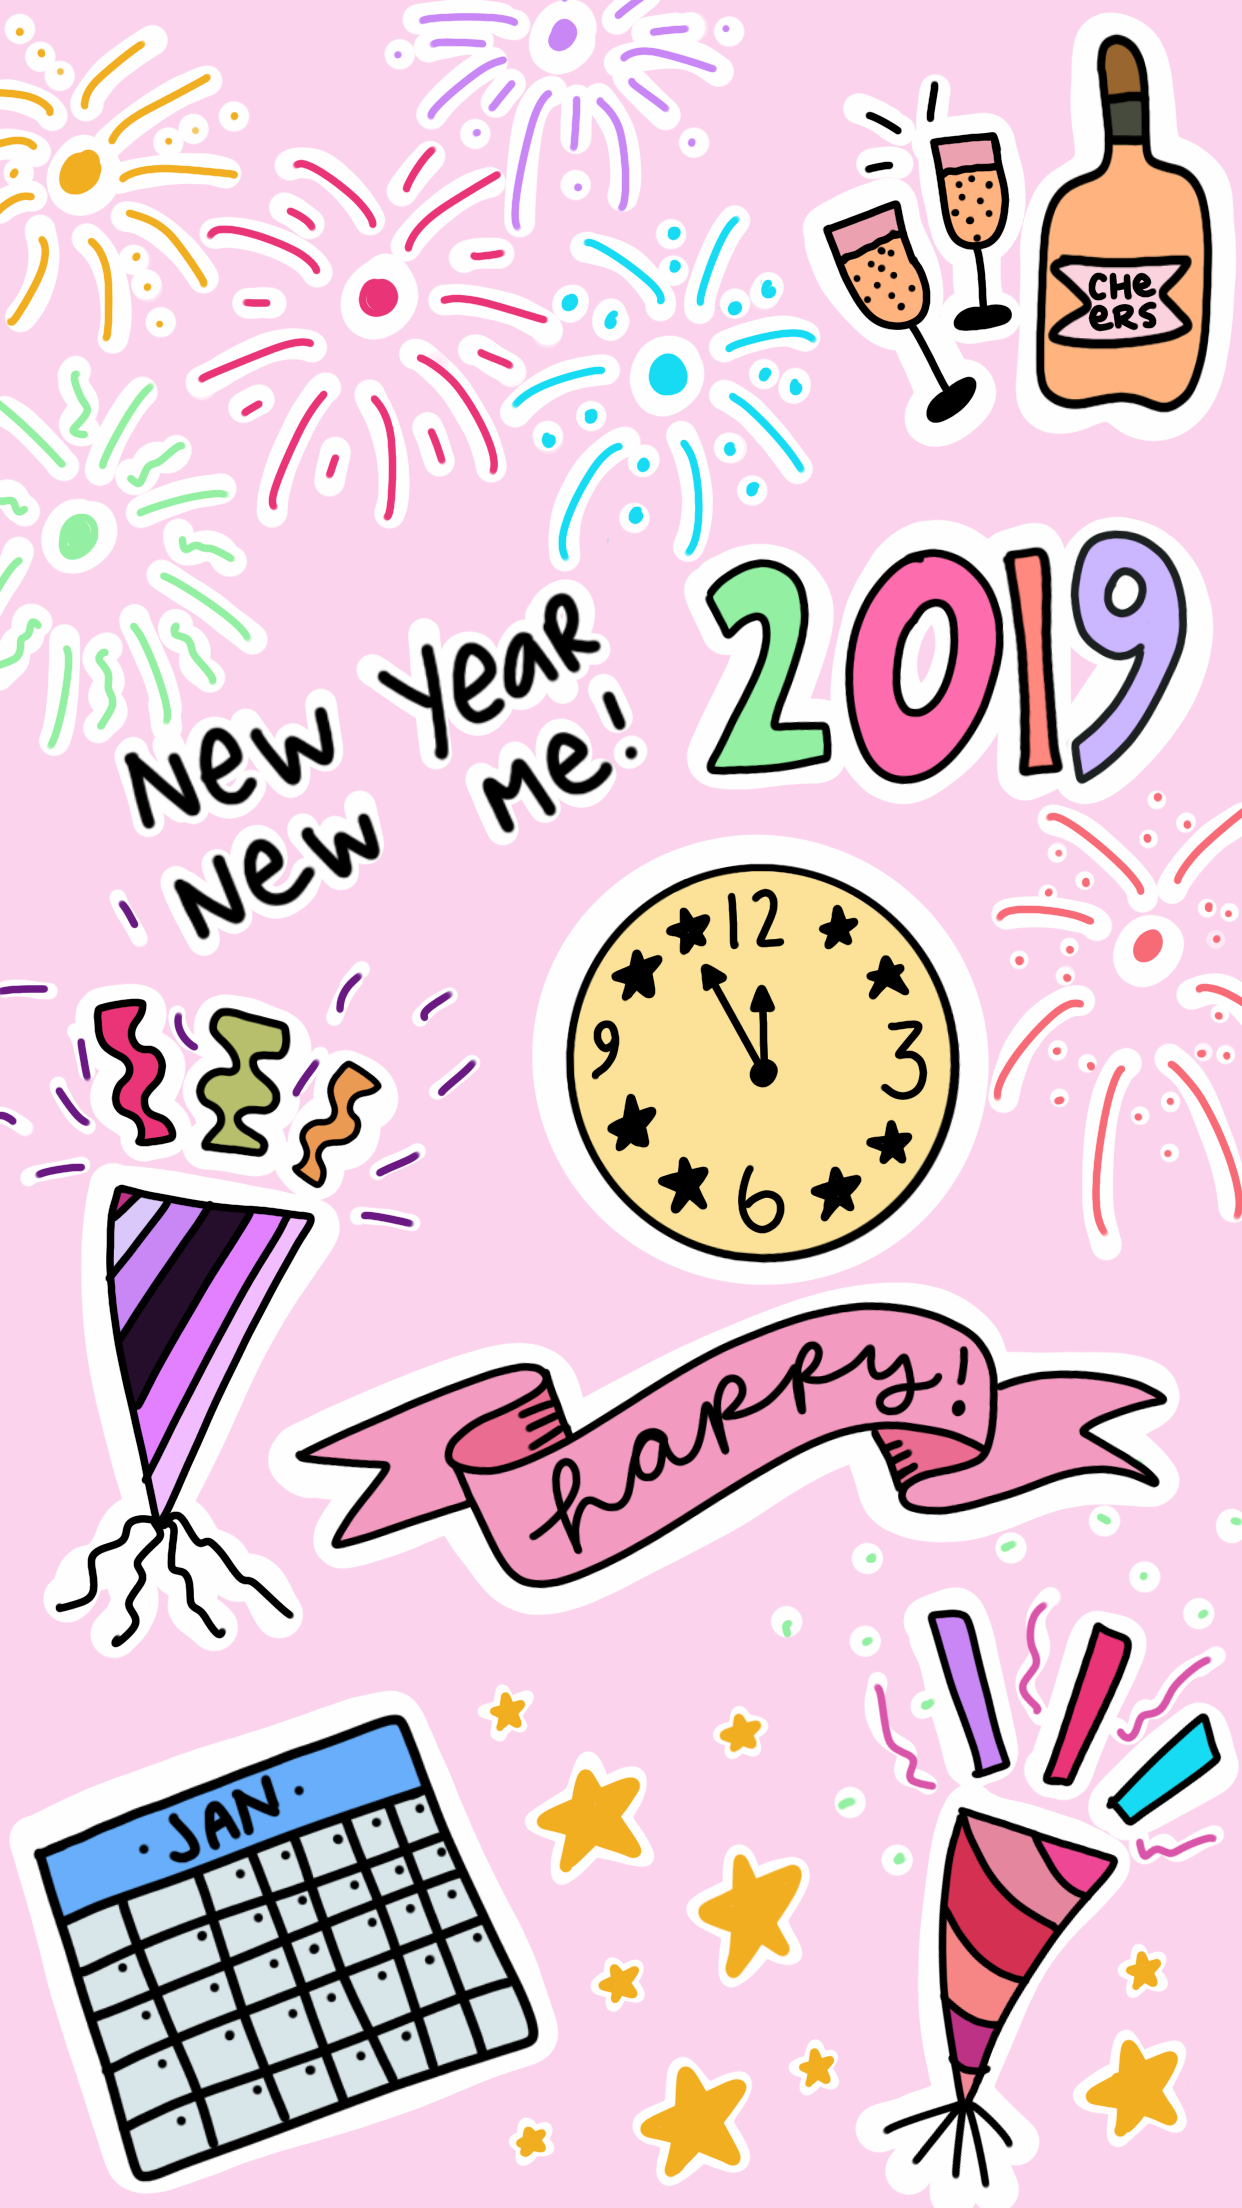 January 2019 FREE Phone Wallpaper WITHOUT Calendar